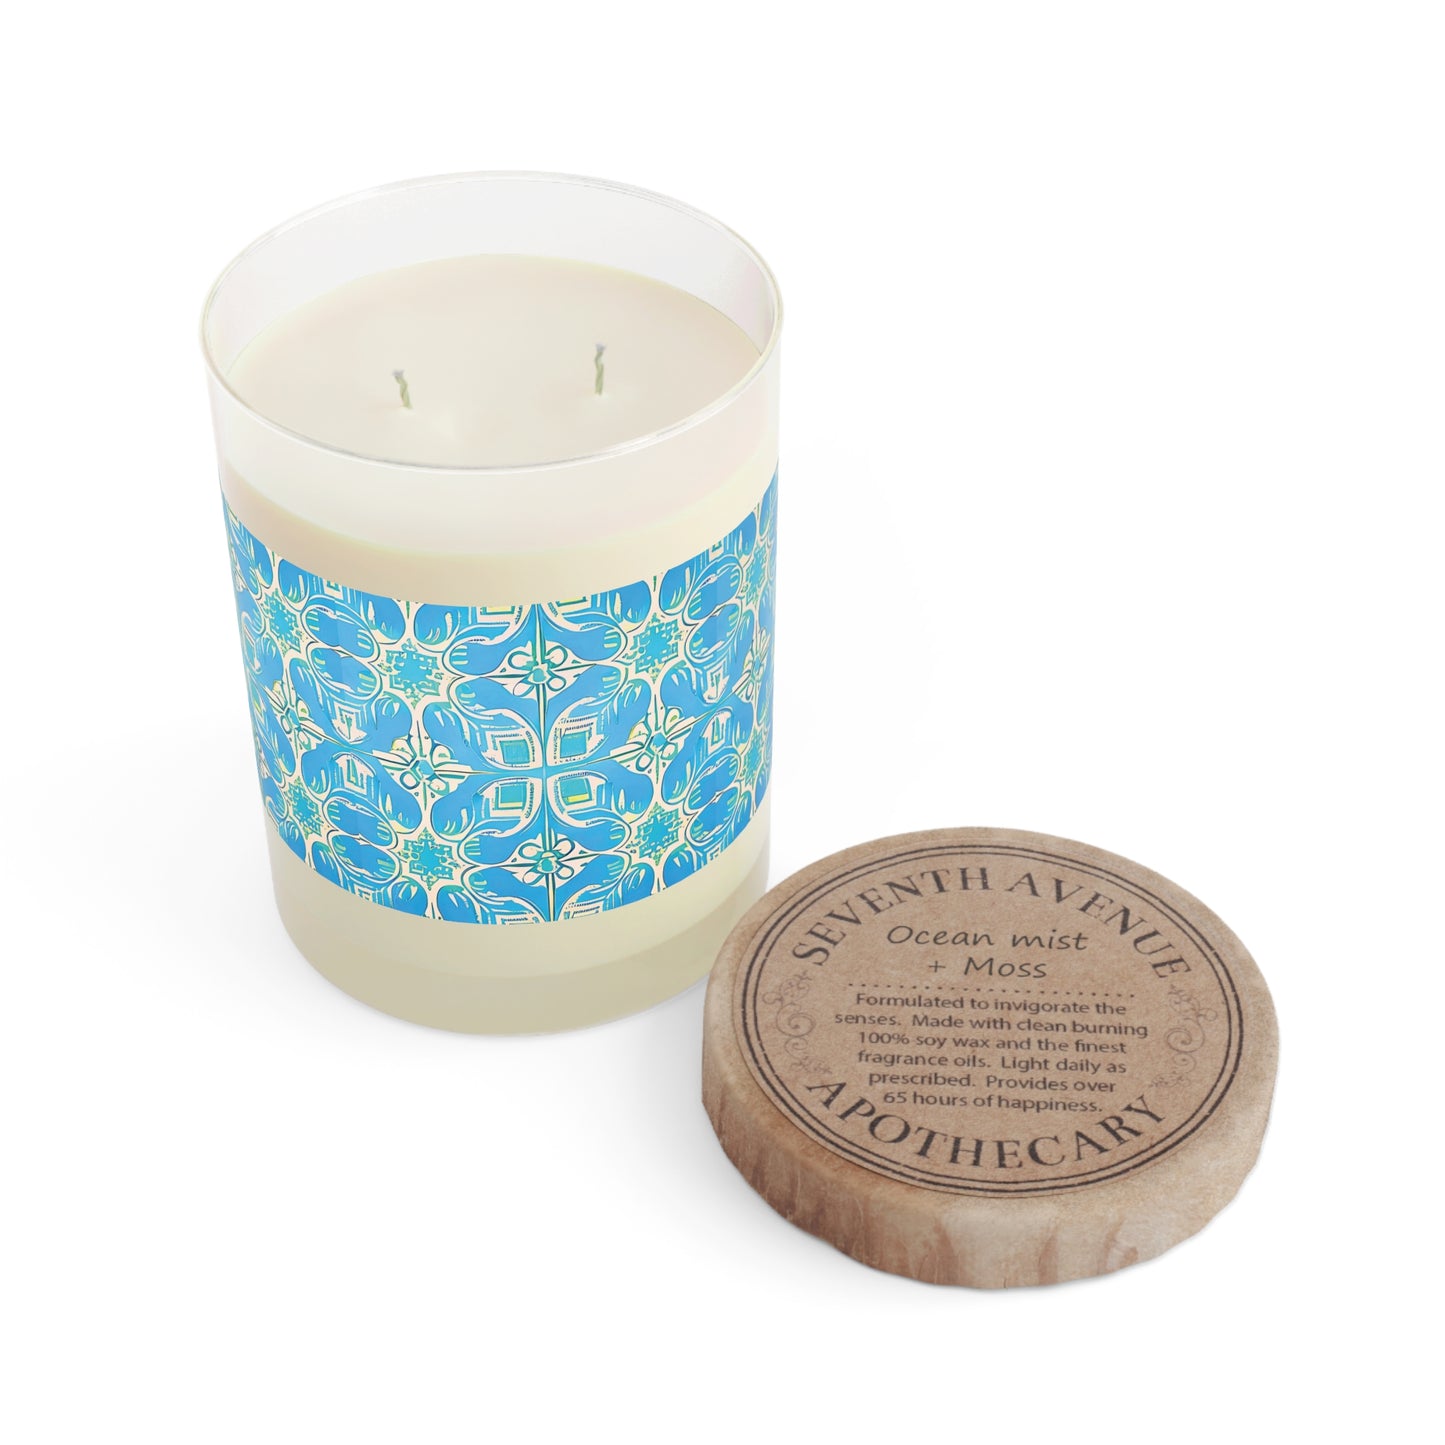 Greek Island Villa Tile Pattern Travel Coastal Ocean Aromatherapy Natural Essential Oils Decorative Scented Candle - Full Glass, 11oz